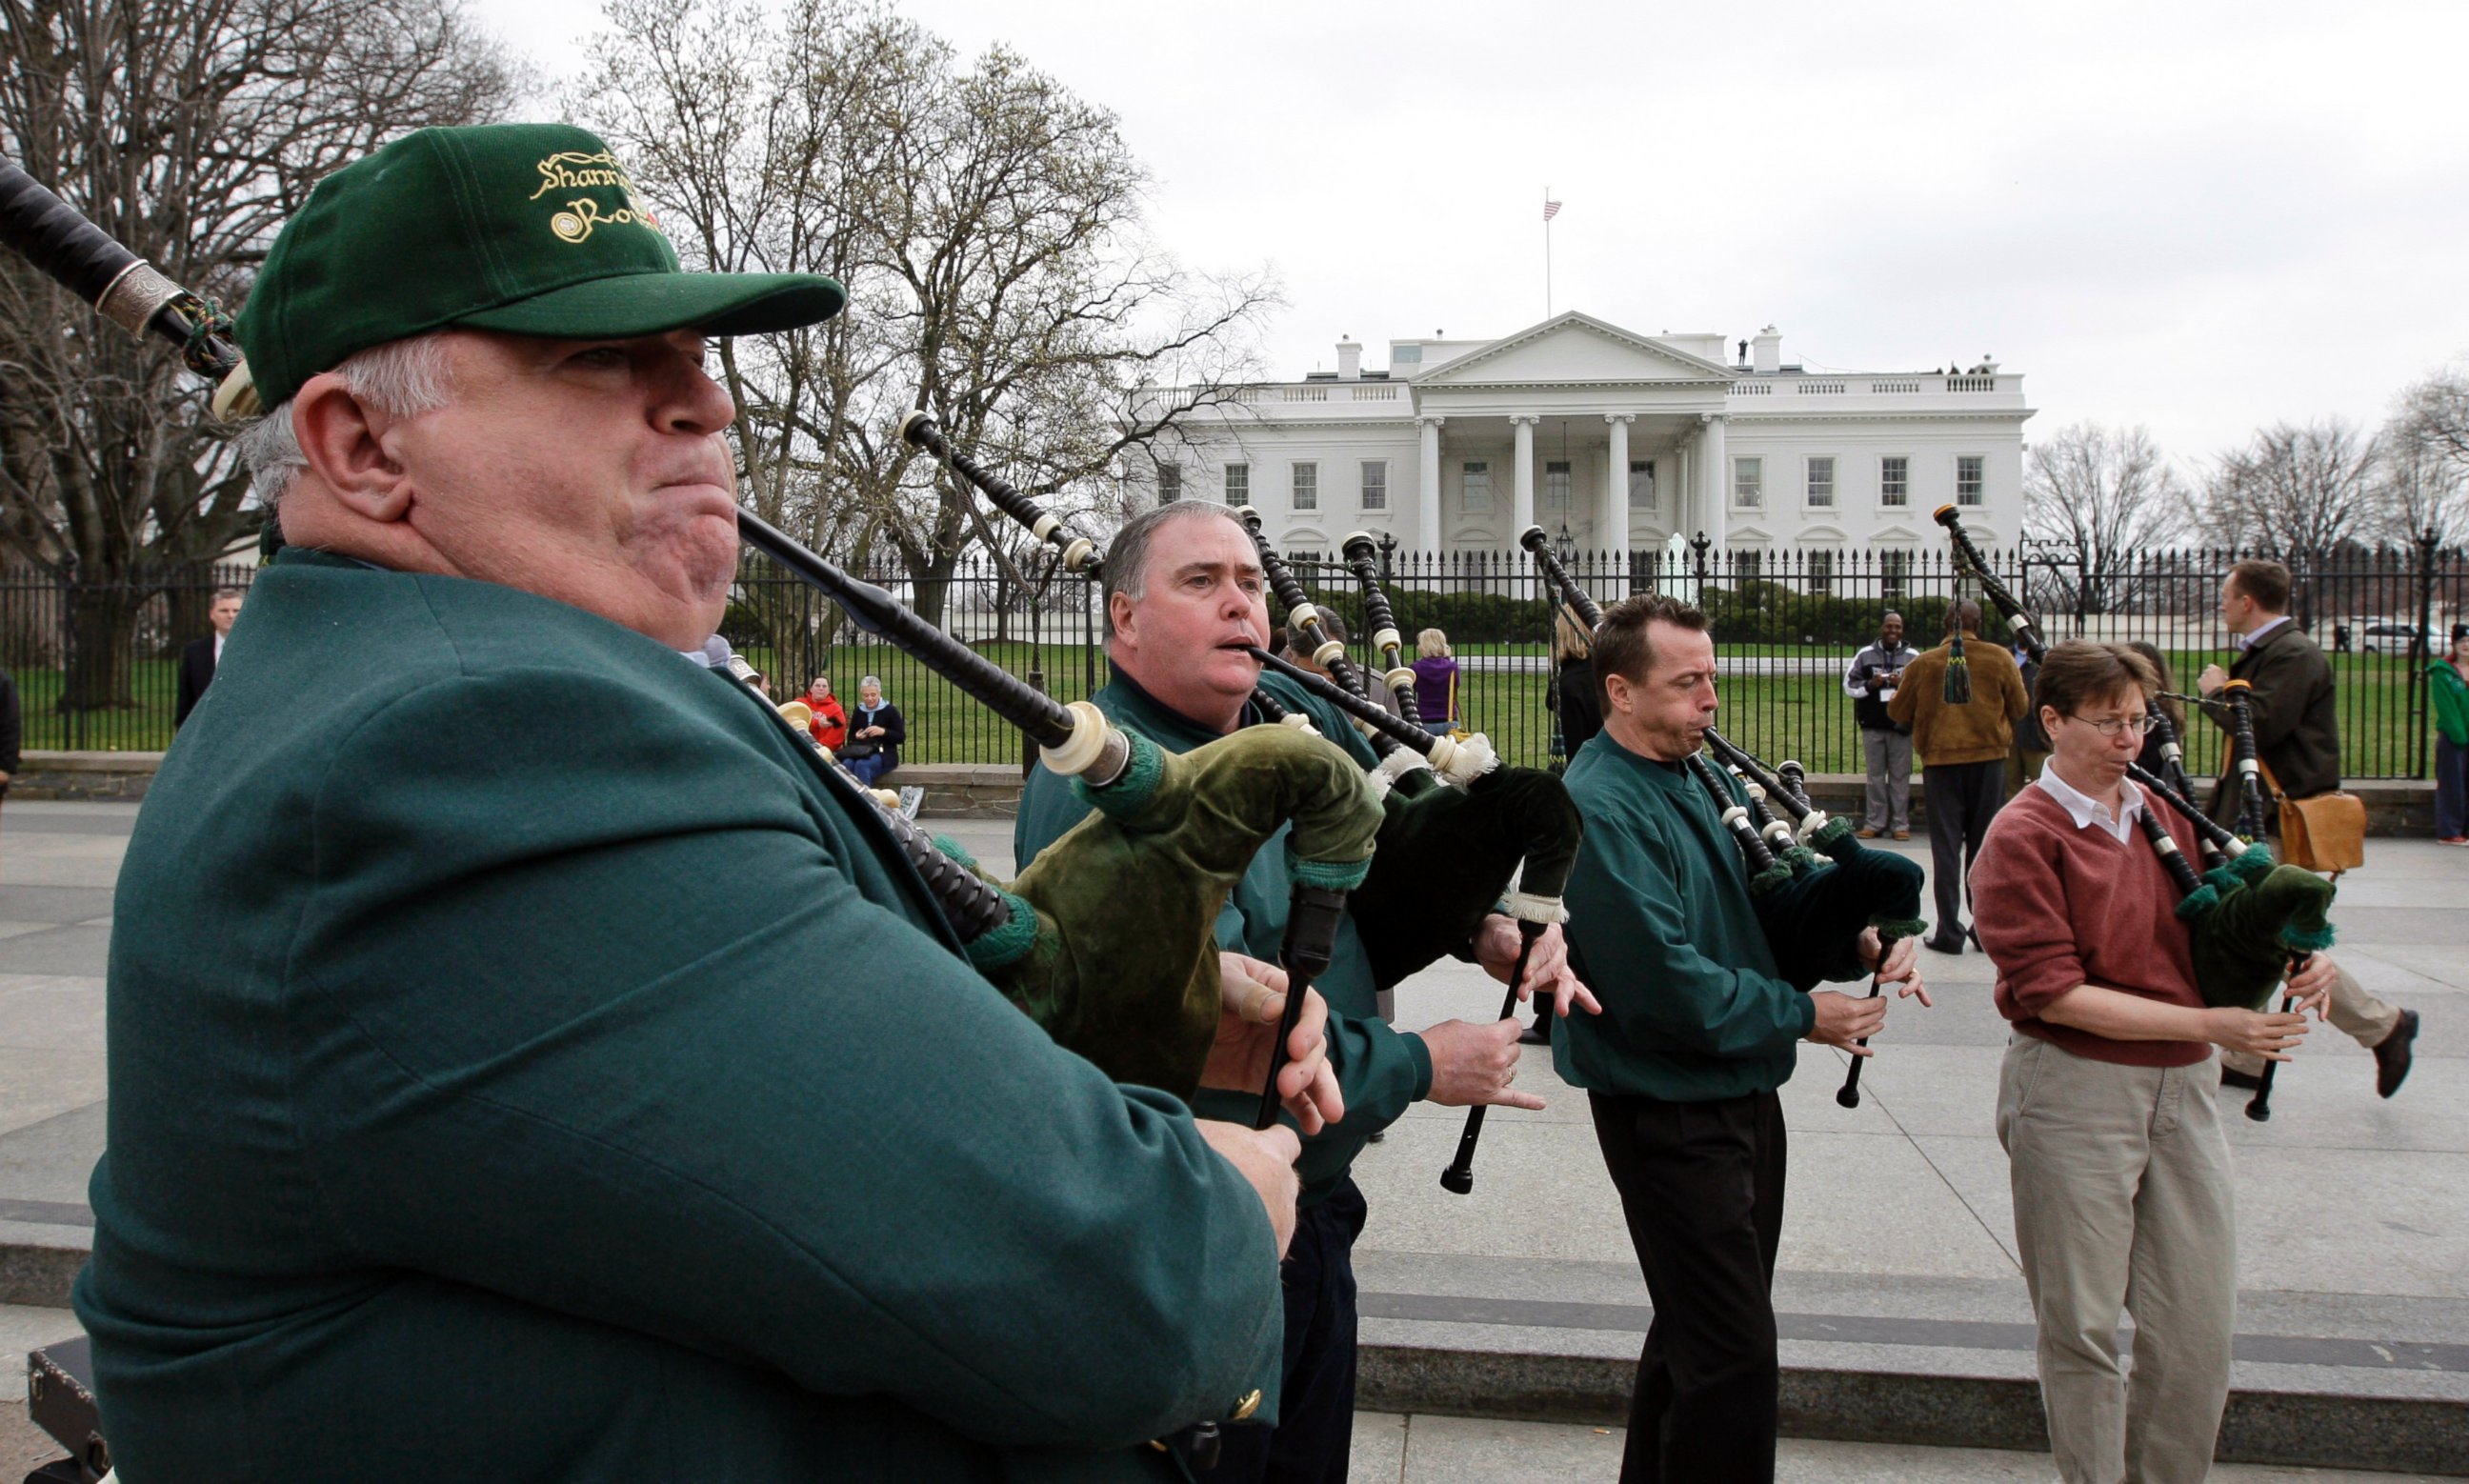 PHOTO: Bill McTighe of Chicago, plays the bagpipes with the Shannon Rovers in front of The White House in Washington, March 17, 2009.